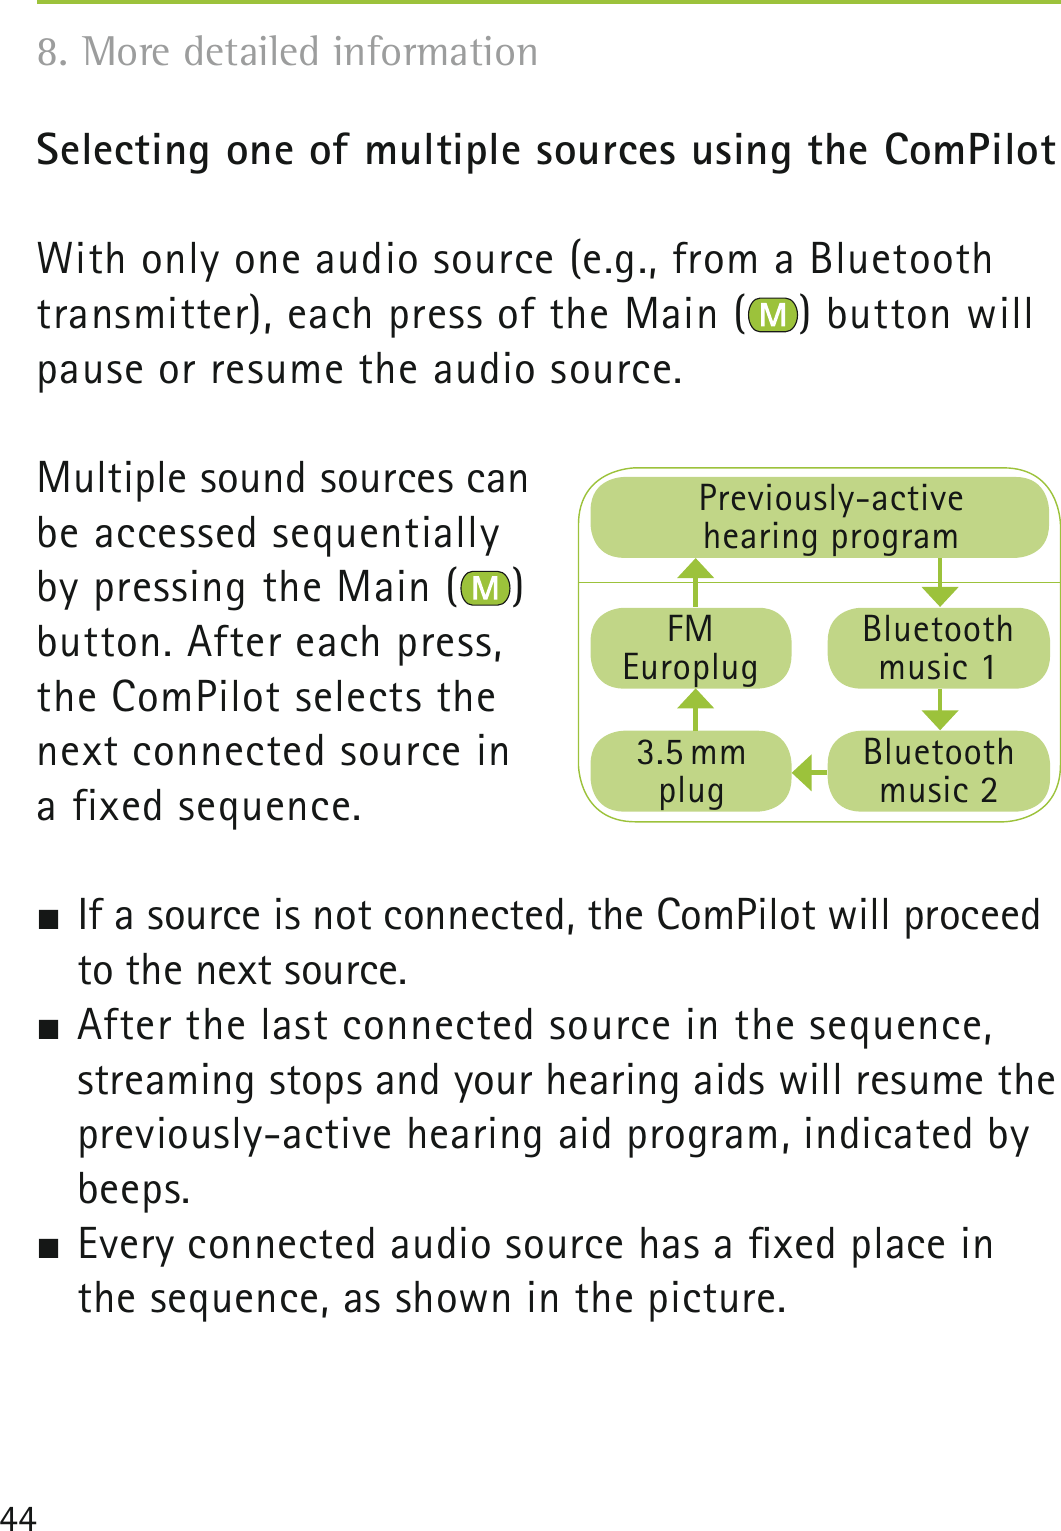 44Selecting one of multiple sources using the ComPilot With only one audio source (e.g., from a Bluetooth transmitter), each press of the Main ( ) button will pause or resume the audio source.Multiple sound sources can be accessed sequentially by pressing the Main ( ) button. After each press, the ComPilot selects the next connected source in a fixed sequence. If a source is not connected, the ComPilot will proceed to the next source. After the last connected source in the sequence, streaming stops and your hearing aids will resume the previously-active hearing aid program, indicated by beeps. Every connected audio source has a ﬁxed place in the sequence, as shown in the picture.8. More detailed information Previously-active hearing programFM Europlug3.5 mmplugBluetooth music 1Bluetooth music 2